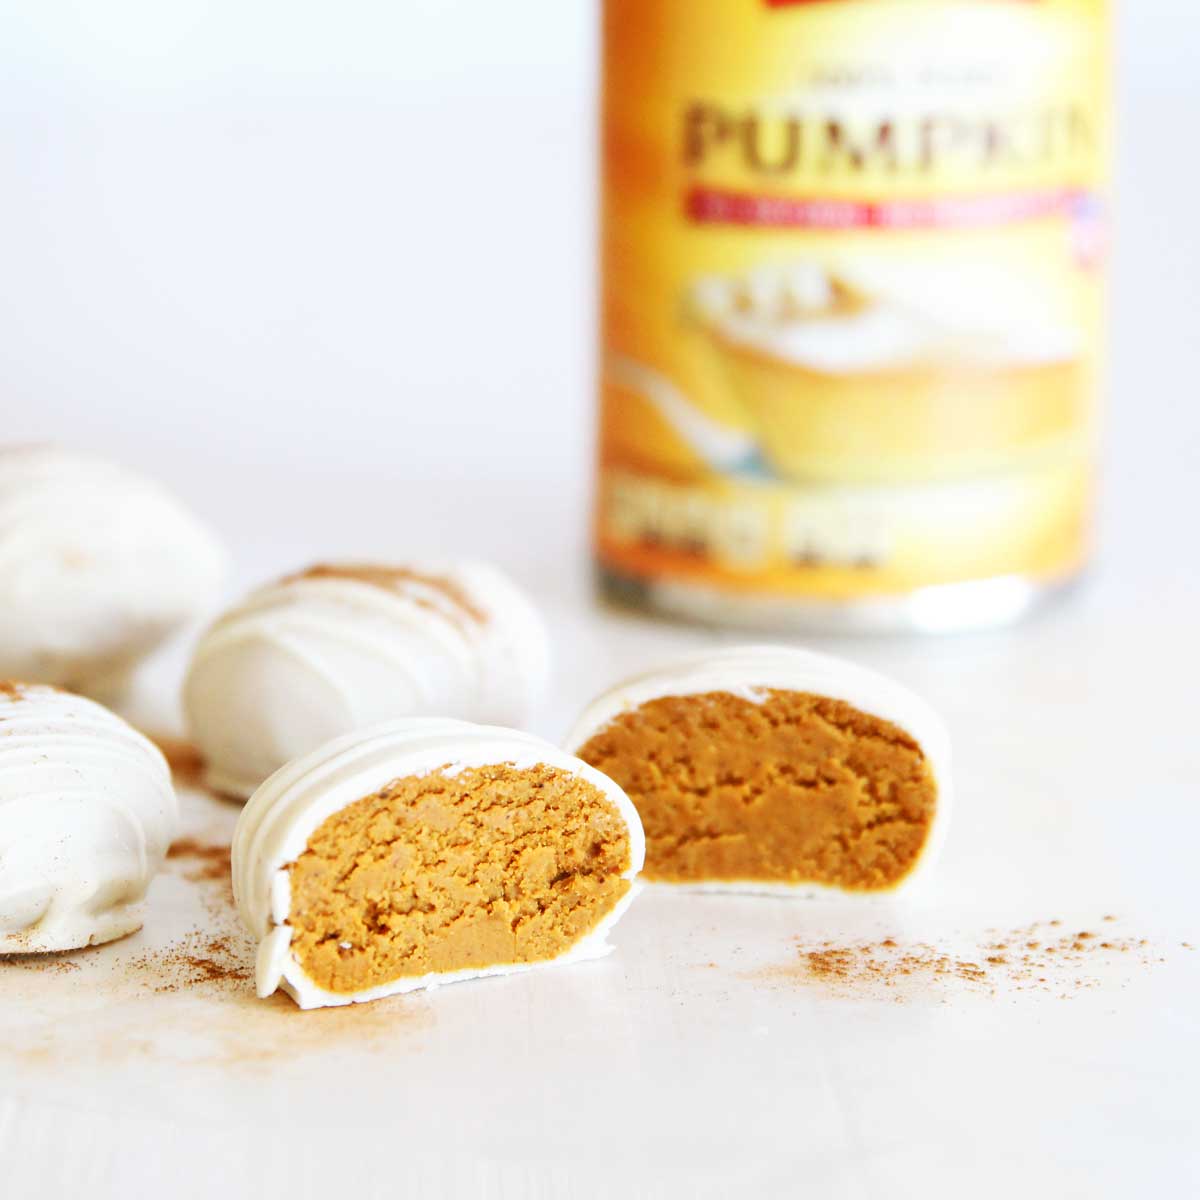 PB Fit Pumpkin Spice White Chocolate Easter Eggs (4-Ingredient Vegan Recipe!) - Canned Chickpea Yeast Bread